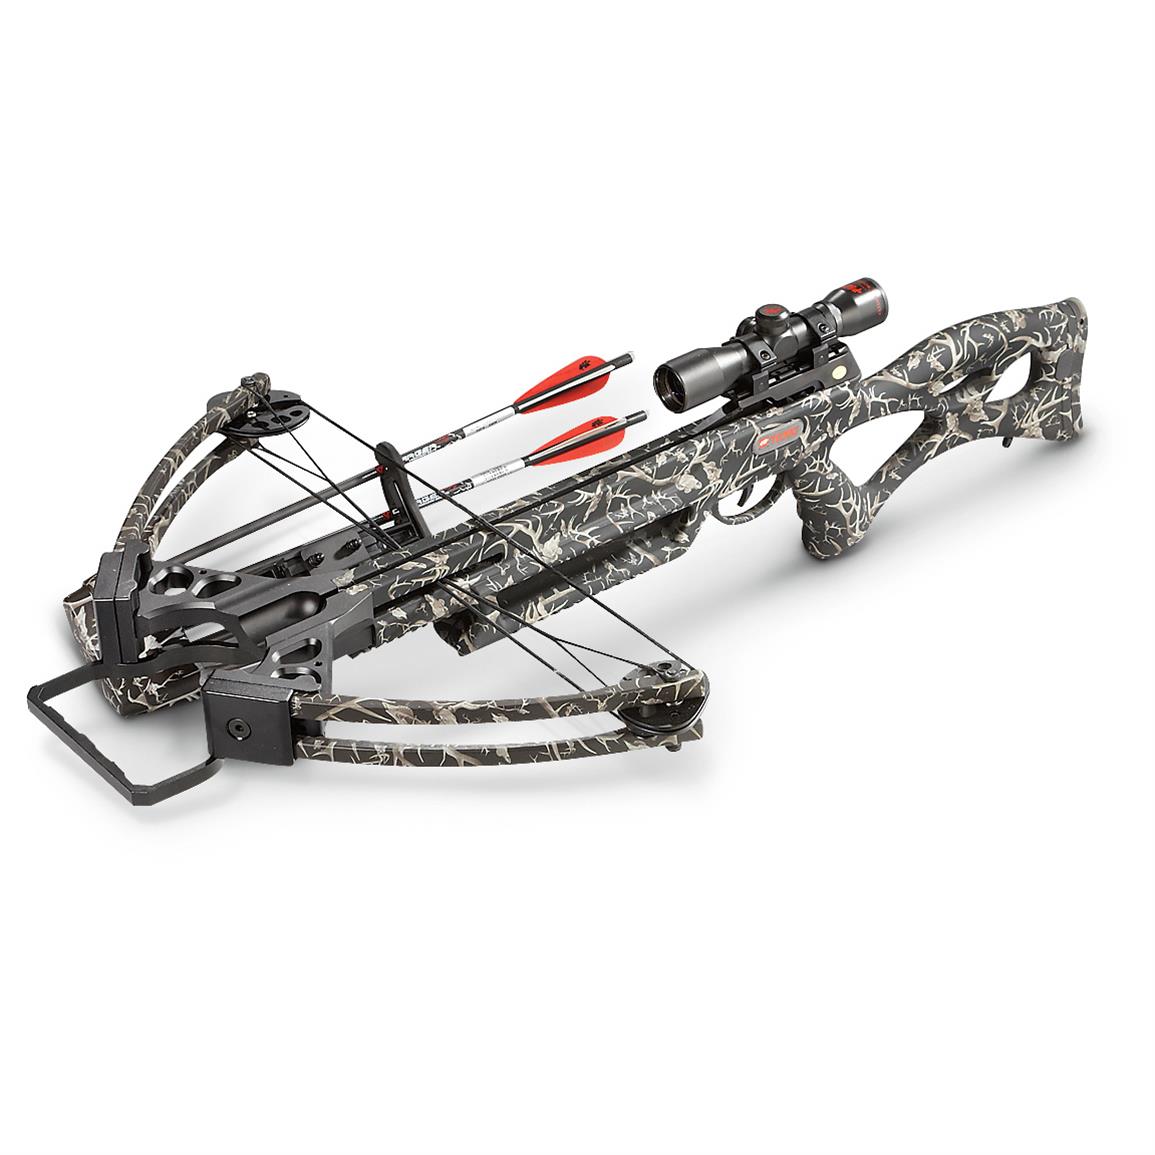 pse-toxic-crossbow-package-skullworks-camo-285058-crossbow